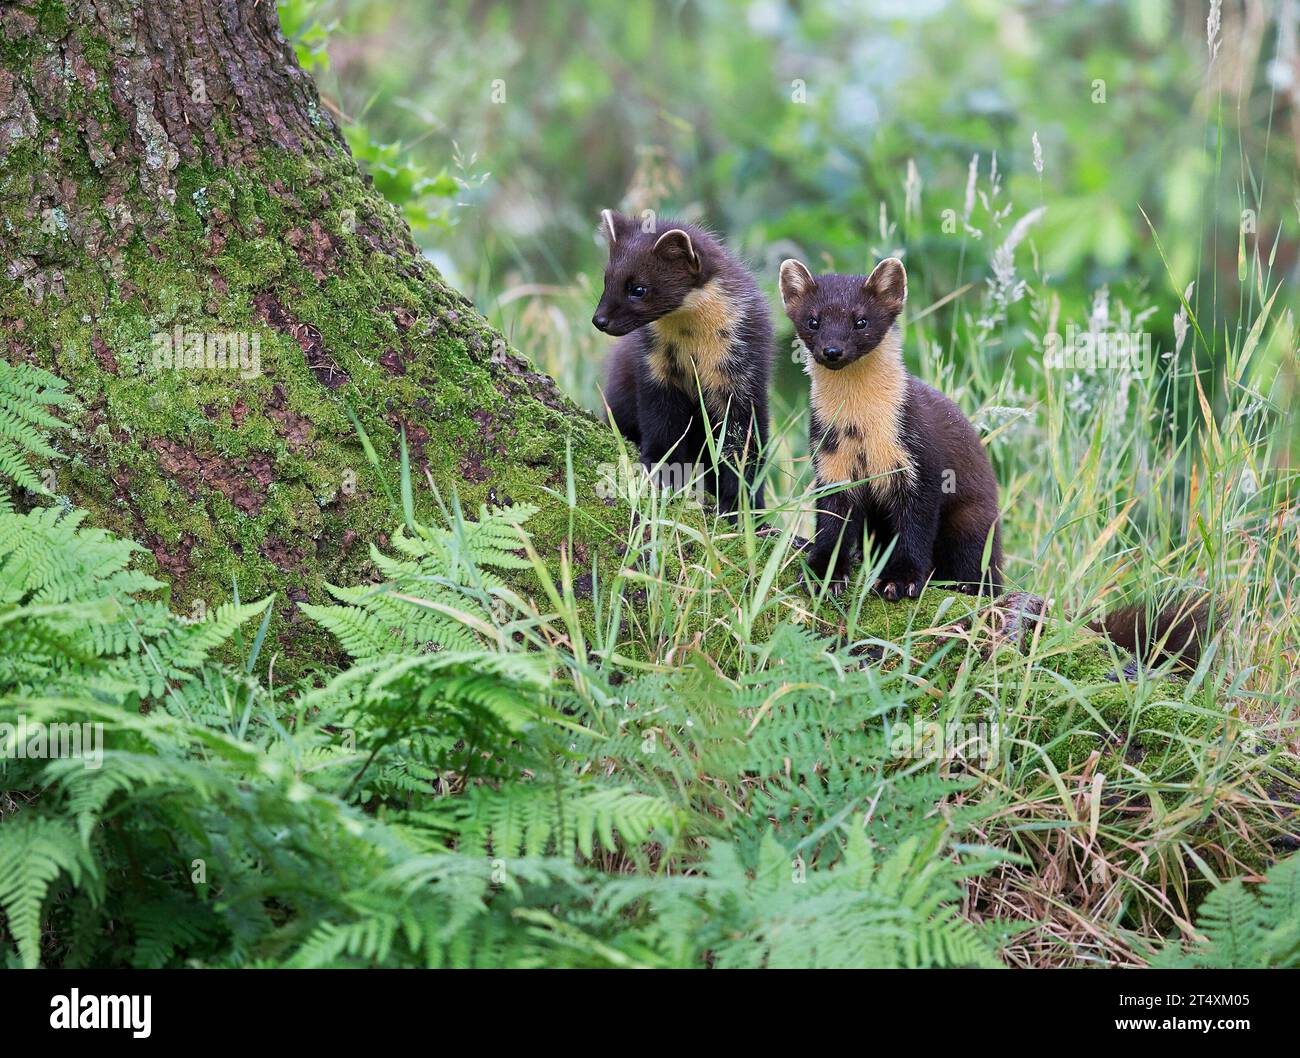 Pine martens in SCOTLAND TOUCHING images of two adorable British pine martens show one of them affectionately showering its mate with kisses.    Captu Stock Photo